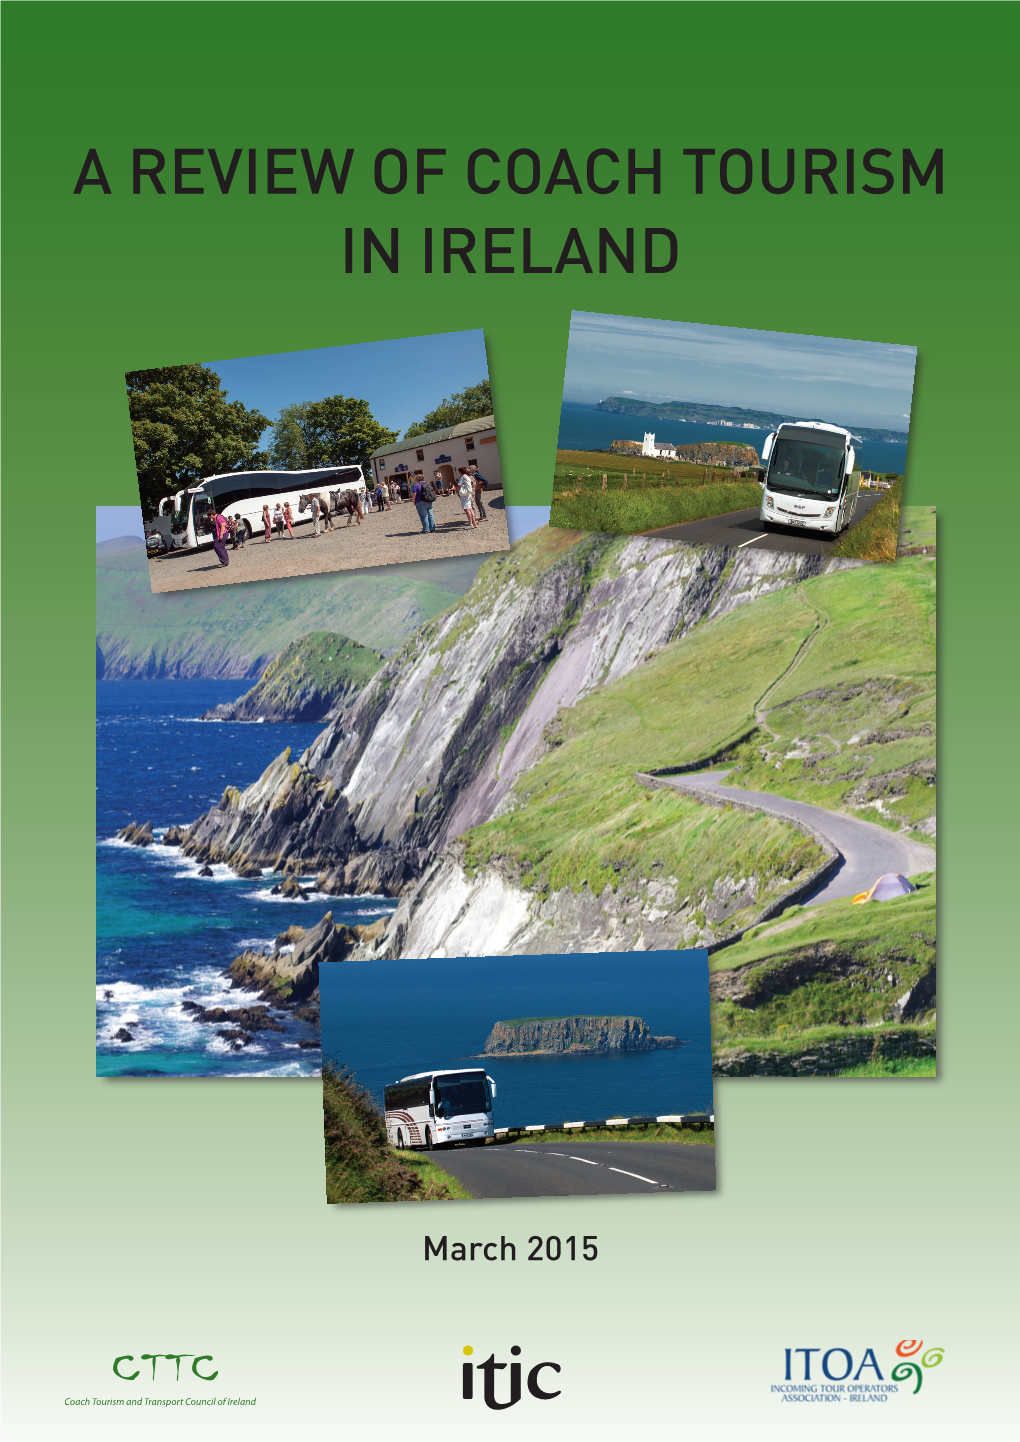 A Review of Coach Tourism in Ireland